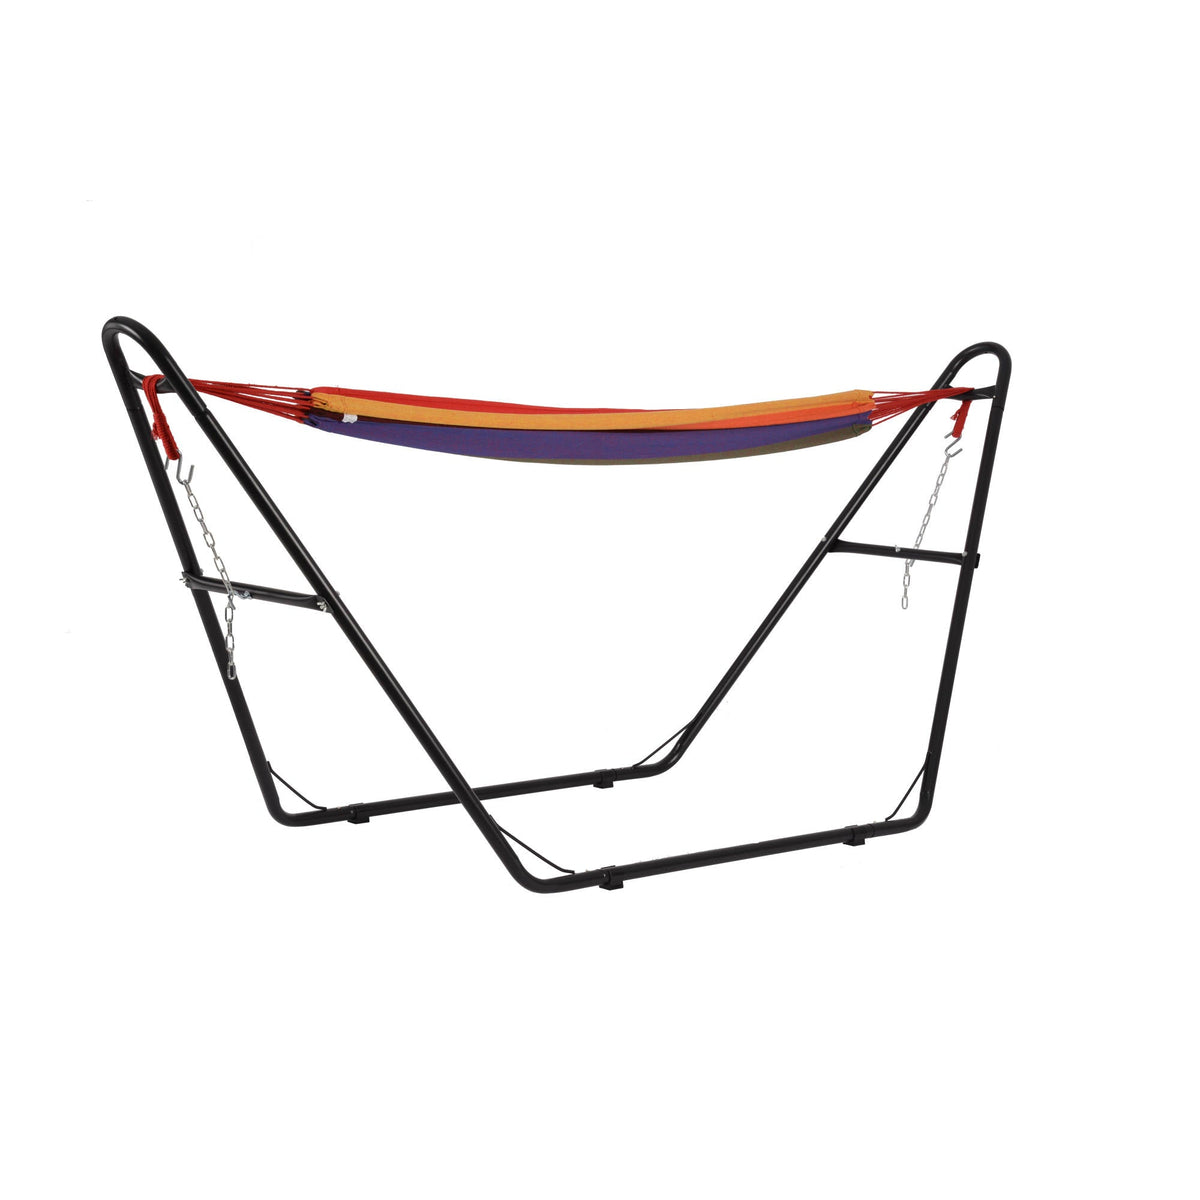 Outdoor Leisure Tropical Hammock and Frame - Stripe